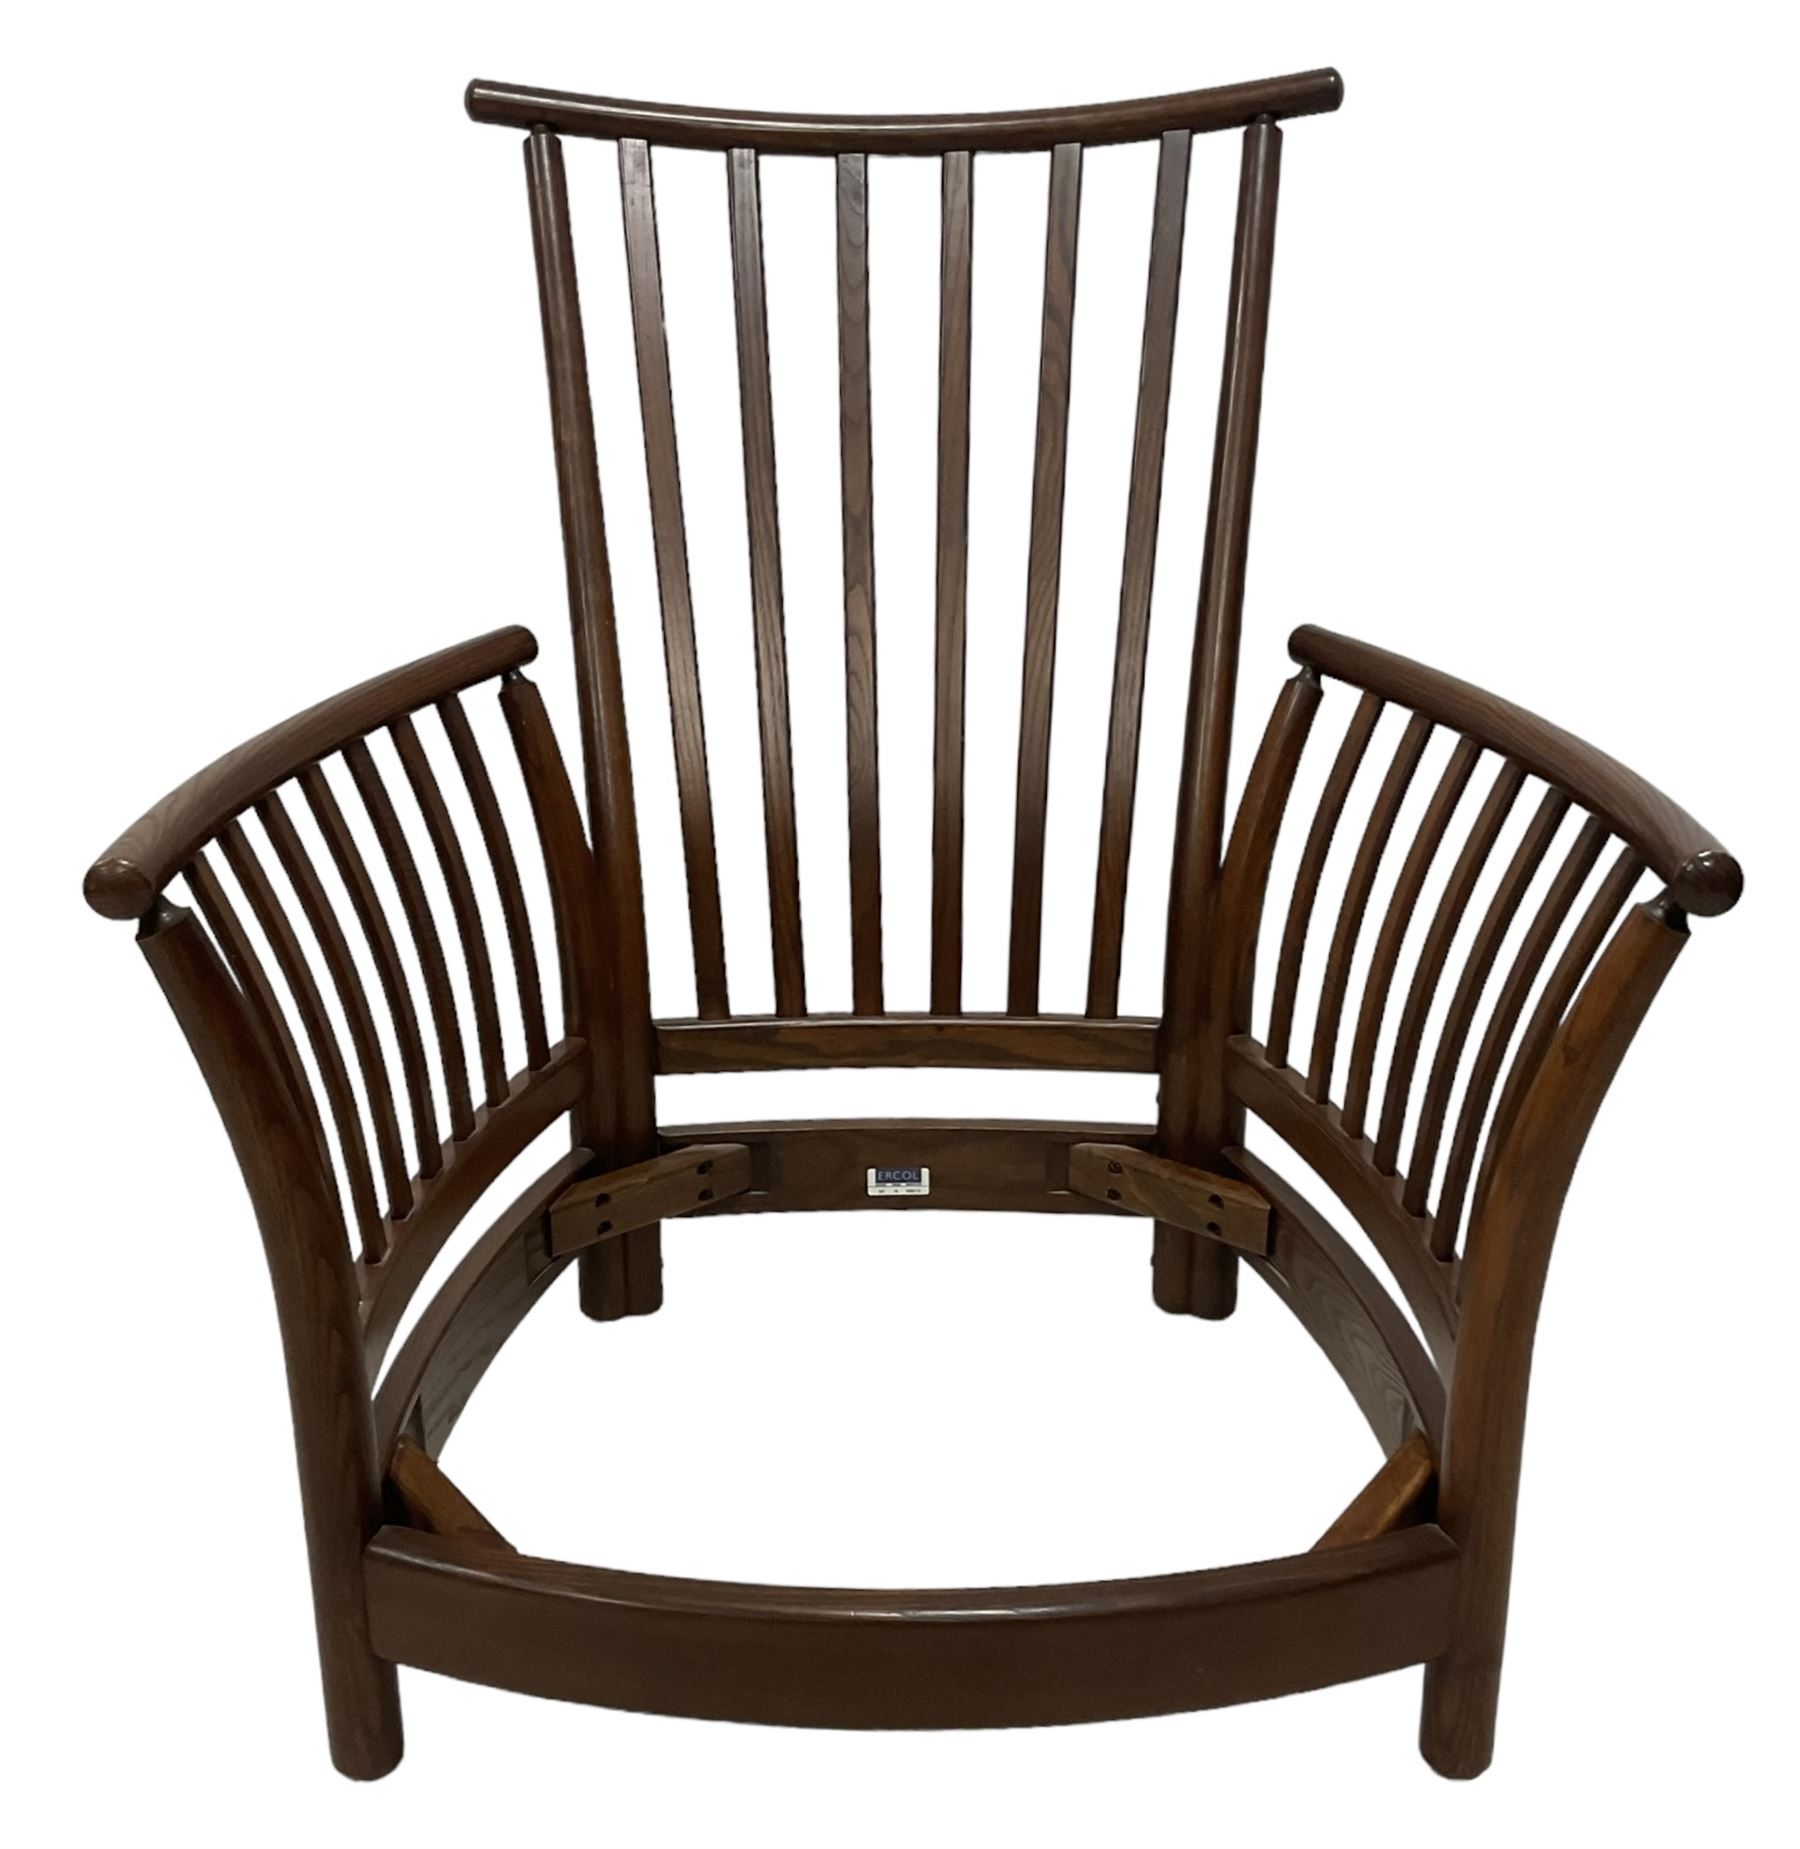 Ercol - mid-20th century elm and beech 'Renaissance' armchair - Image 11 of 14